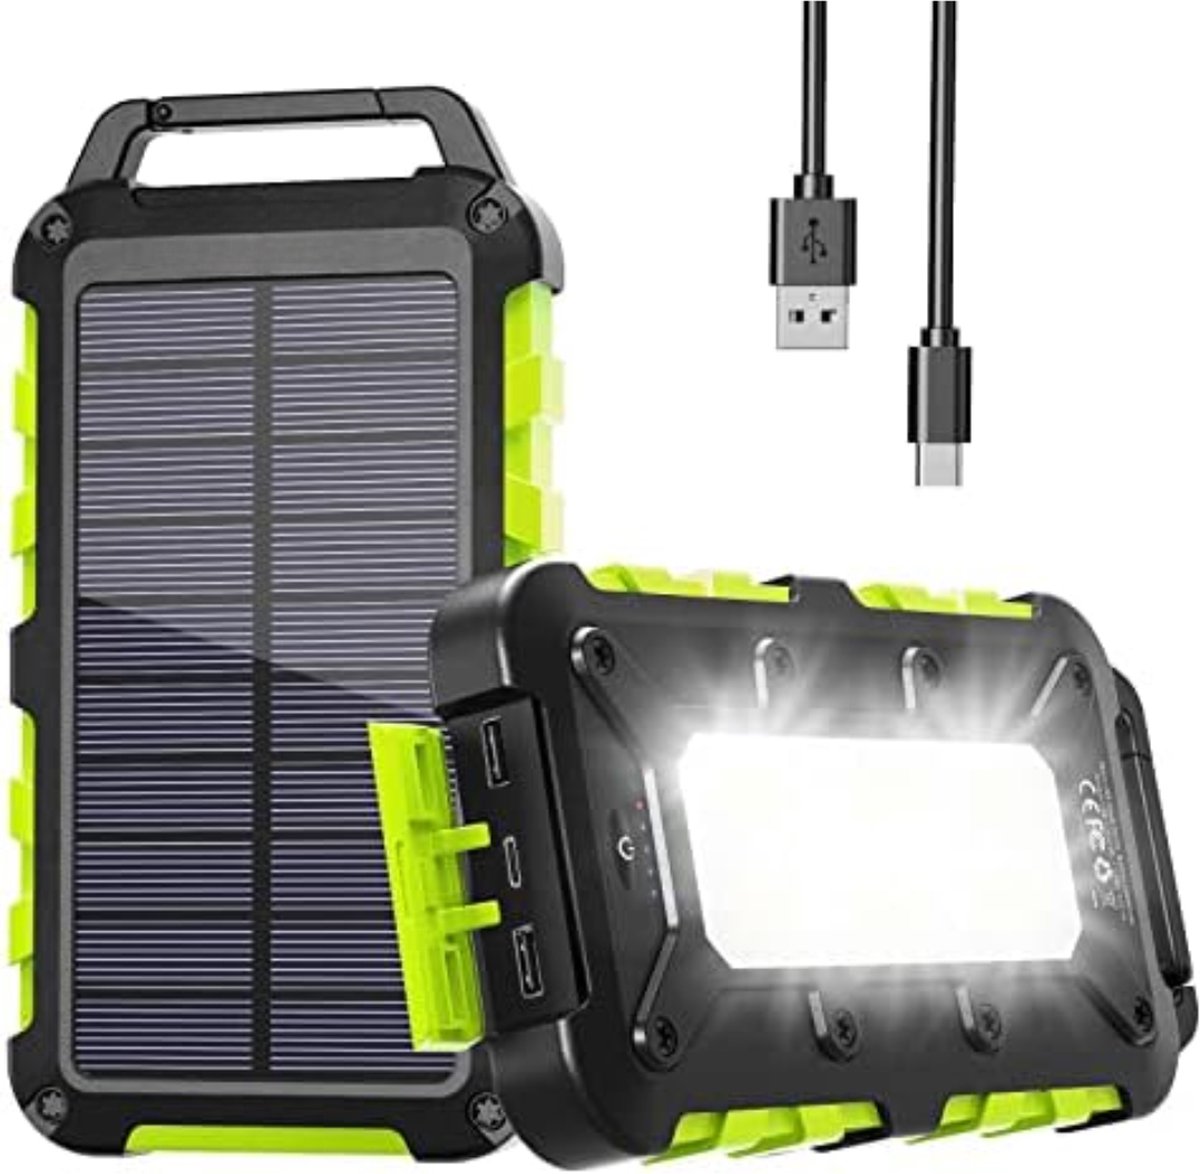 Velox Solar charger - Solar oplader - Solar charger zonnepaneel - Solar charger powerbank - 15W